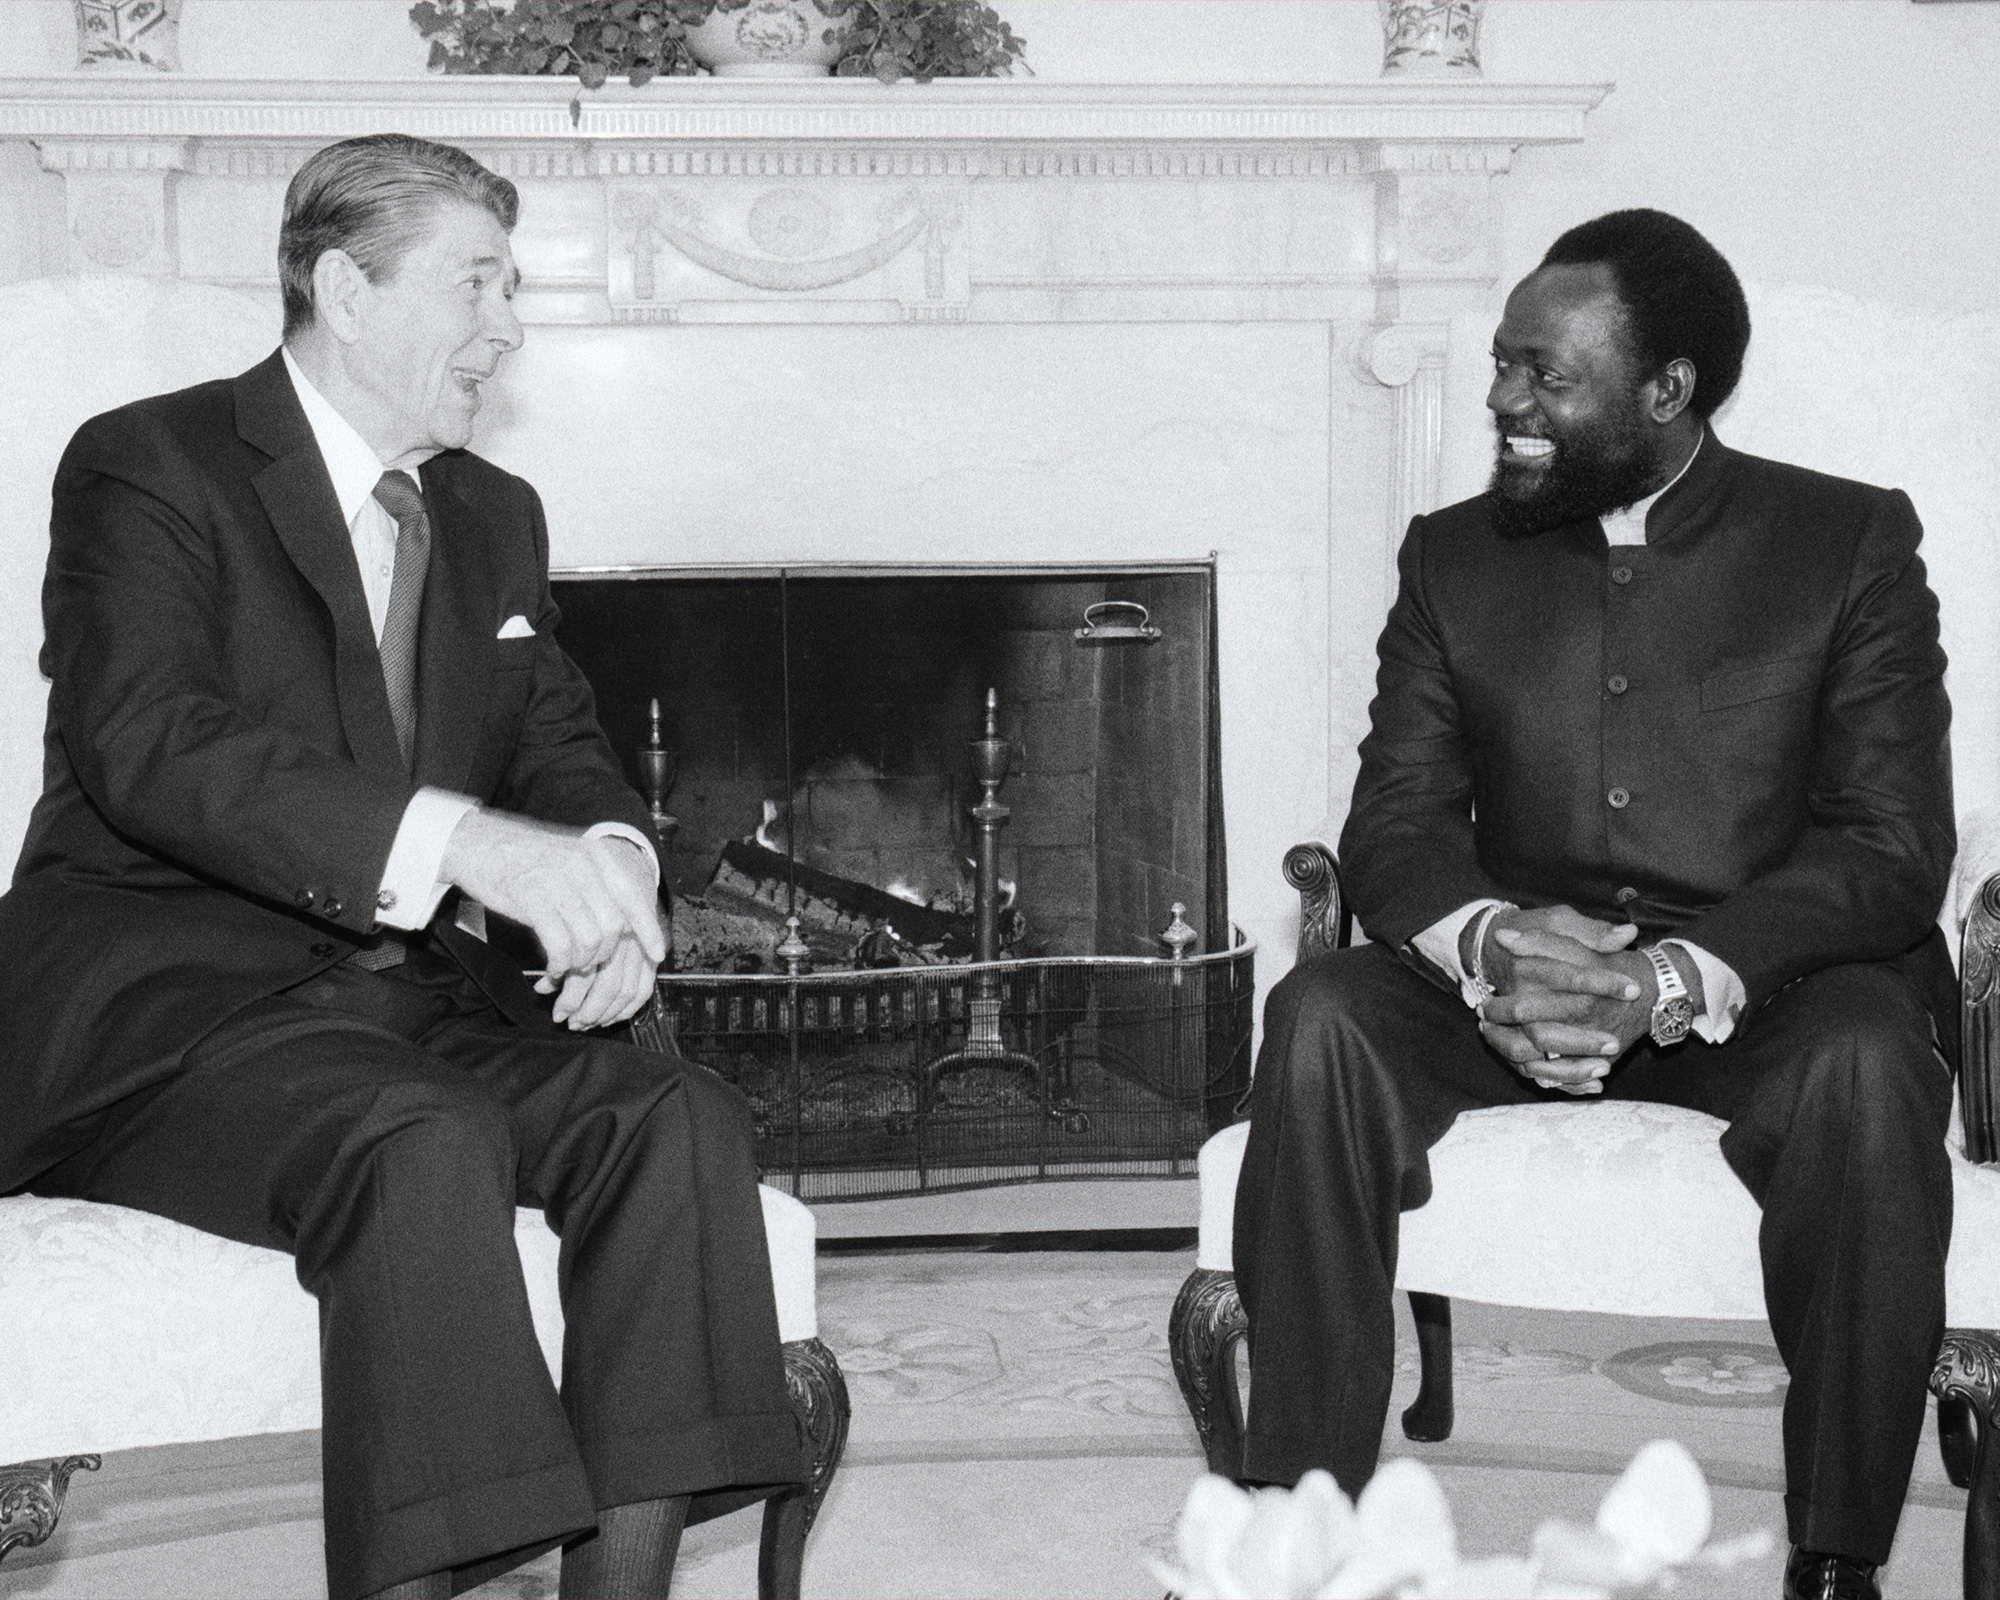 A photo showing anti-communist Angolan guerrilla leader Jonas Savimbi meeting with President Ronald Reagan in the Oval Office in Washington, D.C. on January 30, 1986.